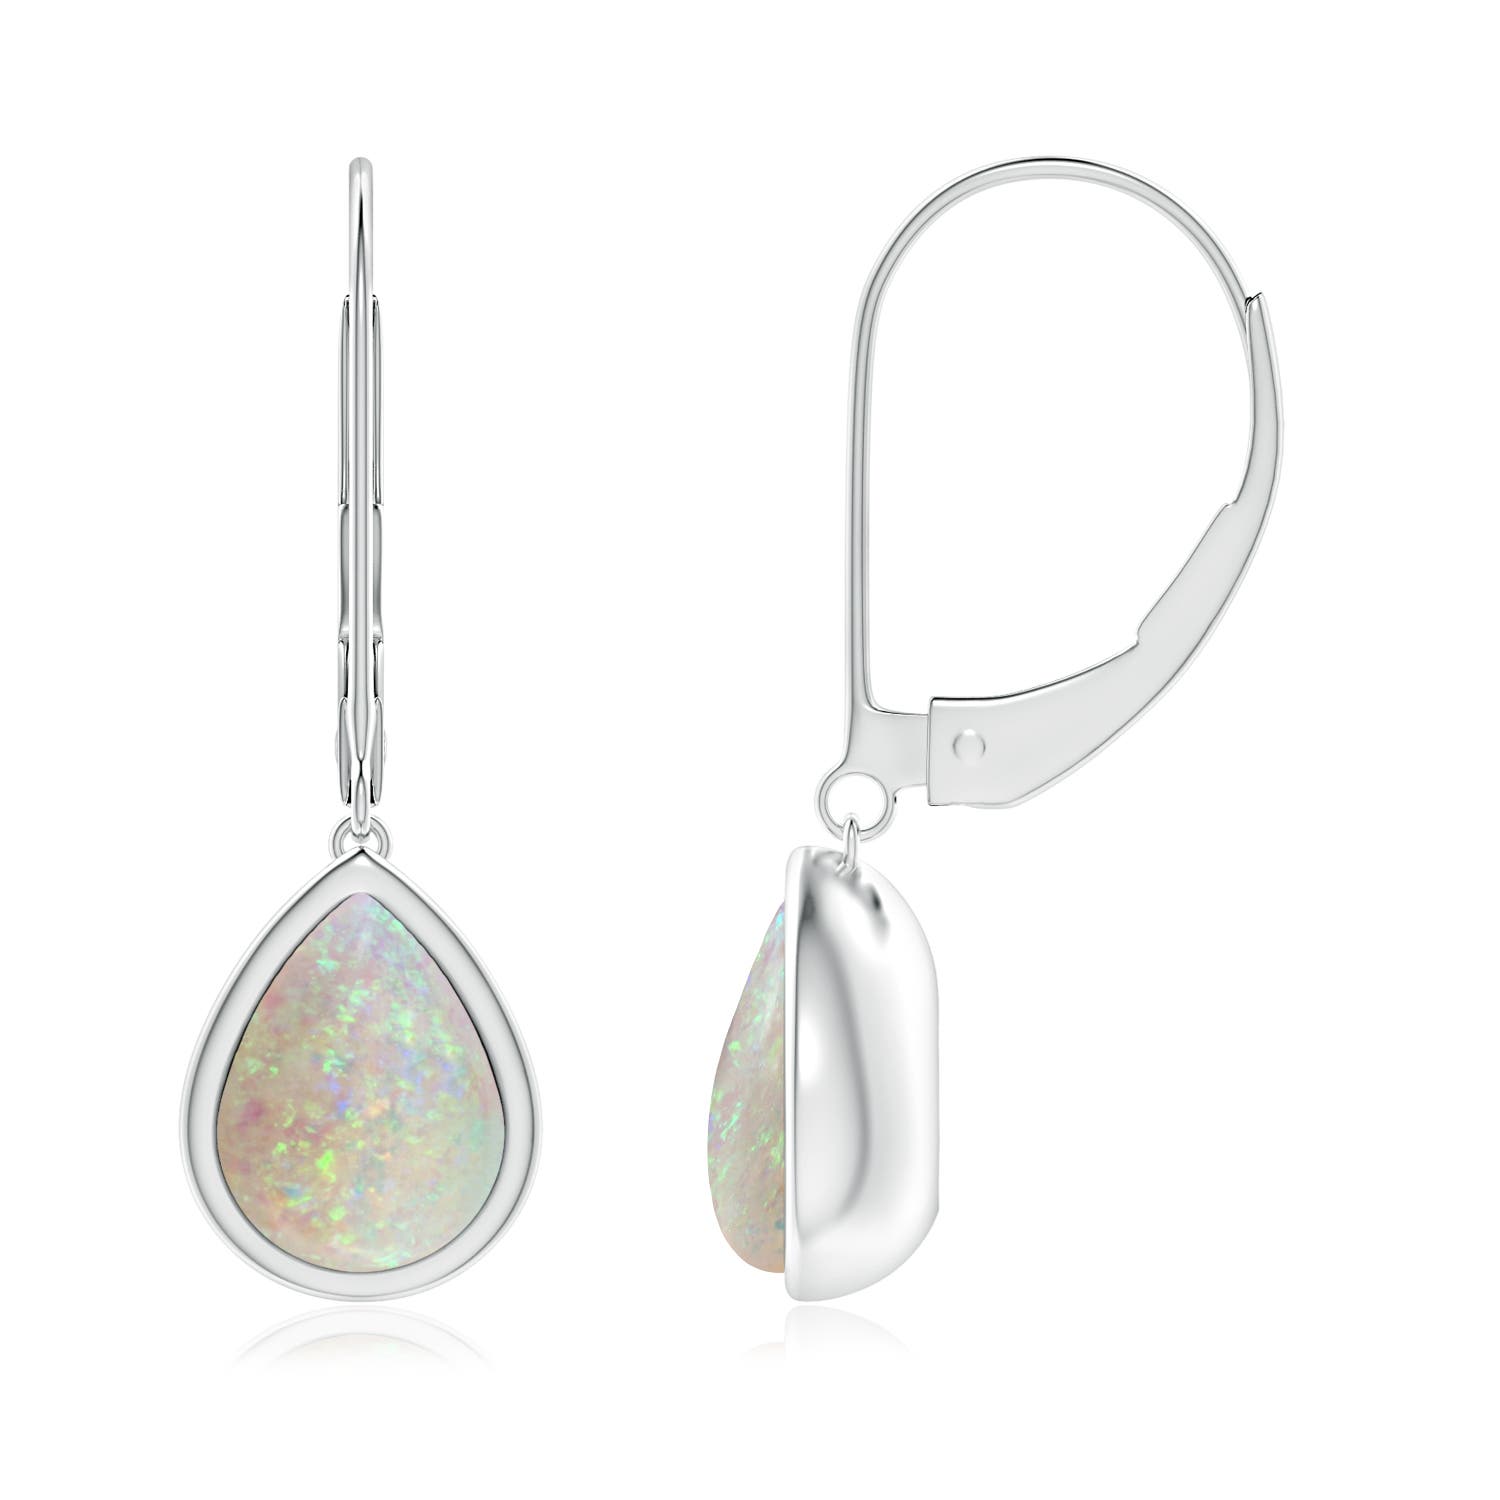 AAA - Opal / 1.4 CT / 14 KT White Gold